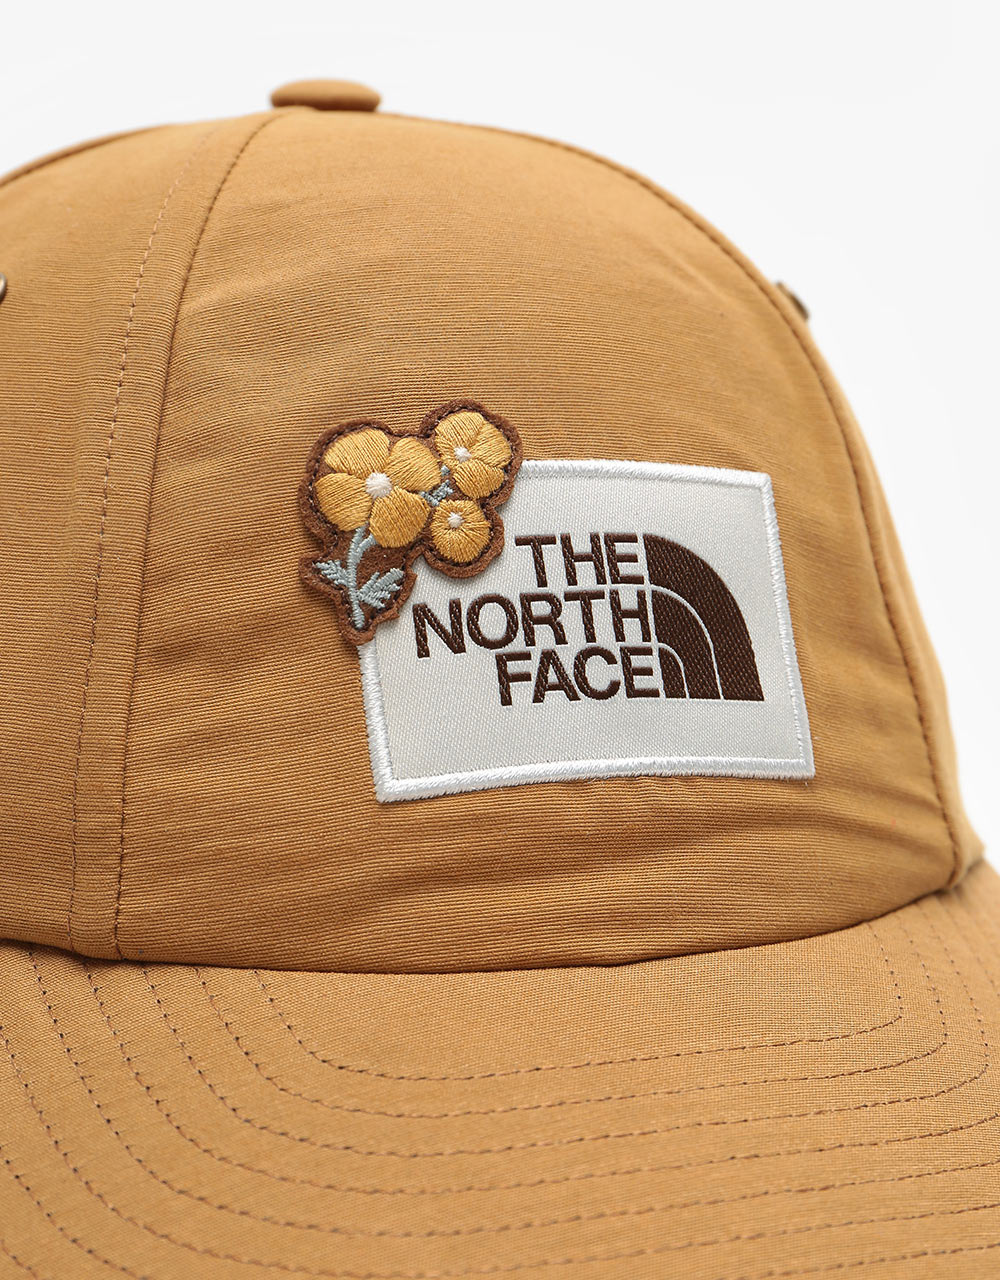 The North Face Berkeley 6 Panel Cap - Utility Brown